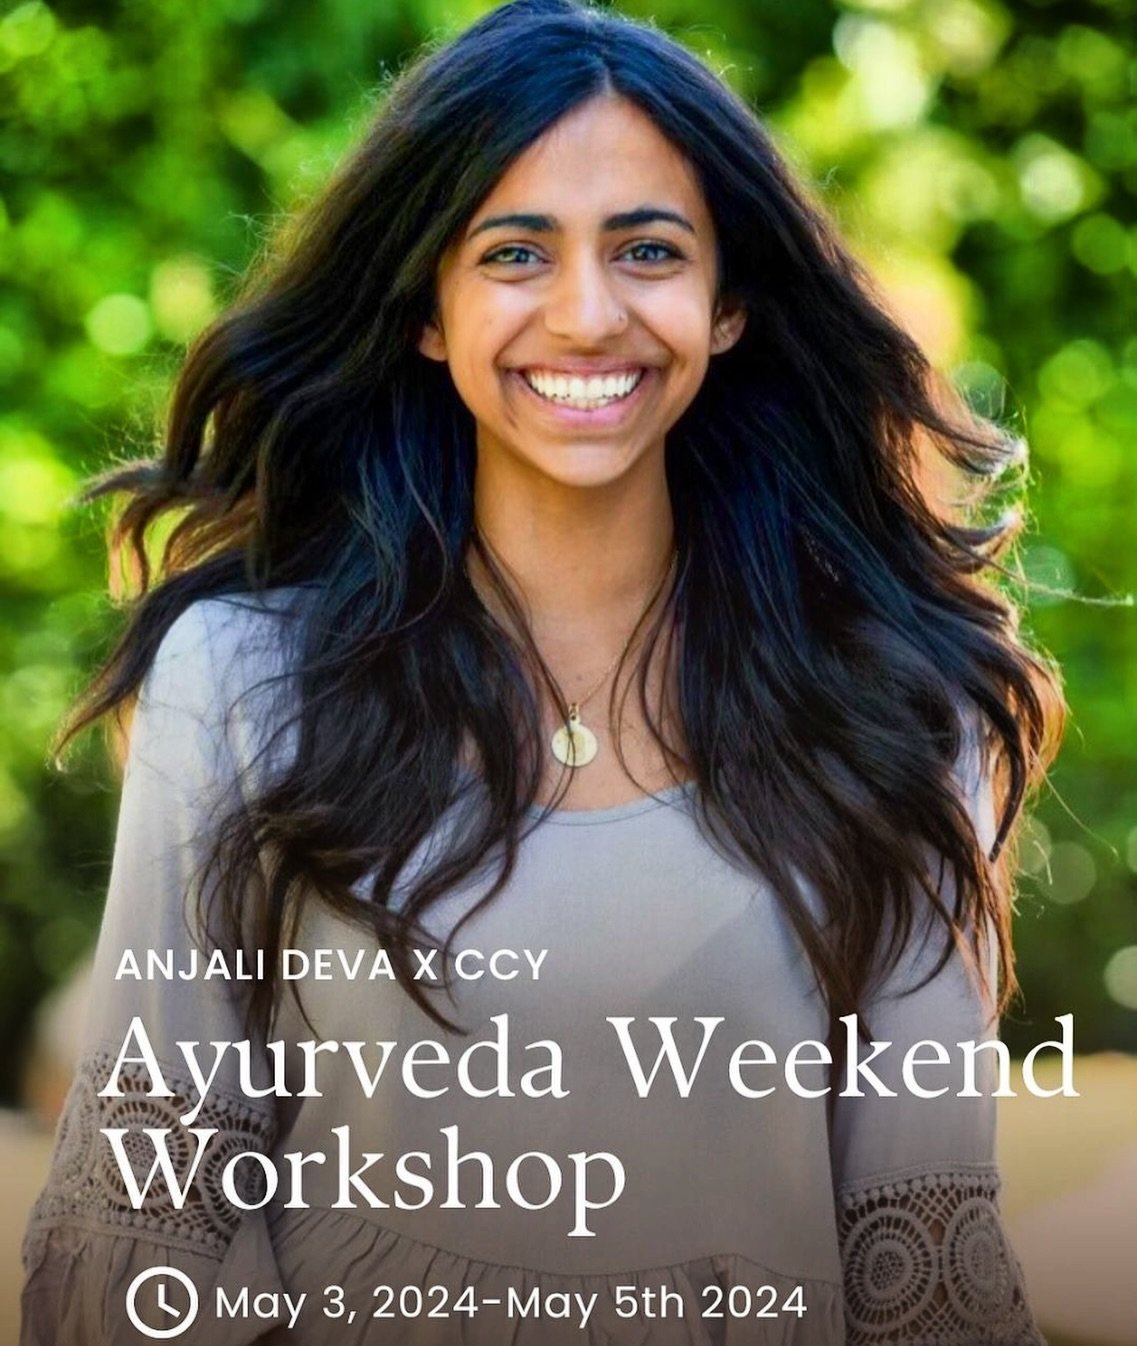 We are thrilled to have Anjali Deva at the studio for a weekend of Ayurvedic wisdom 🤍🫶🌿

Sign up for one day or all with the 🔗 in our bio! 

#ccy #centeredcityyoga #9thand9th #yoga #utahyoga #slcyoga #yogateacher #yogacommunity #slclocal #ayruved